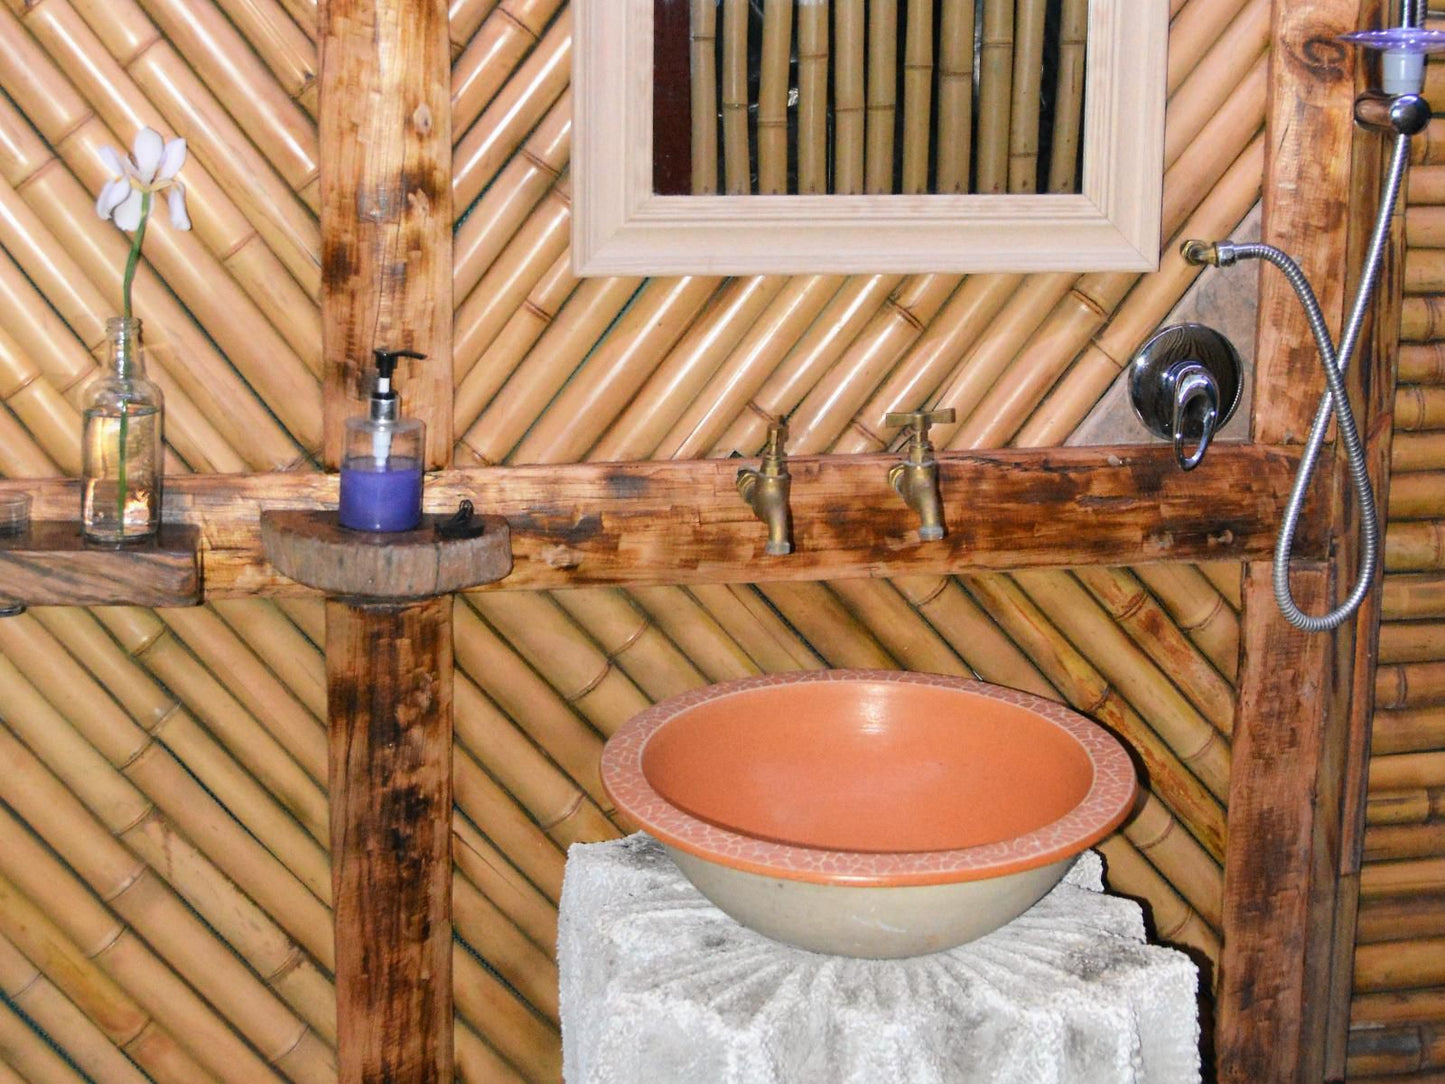 Hazyview Adventure Backpackers Numbi Park Hazyview Mpumalanga South Africa Cabin, Building, Architecture, Sauna, Wood